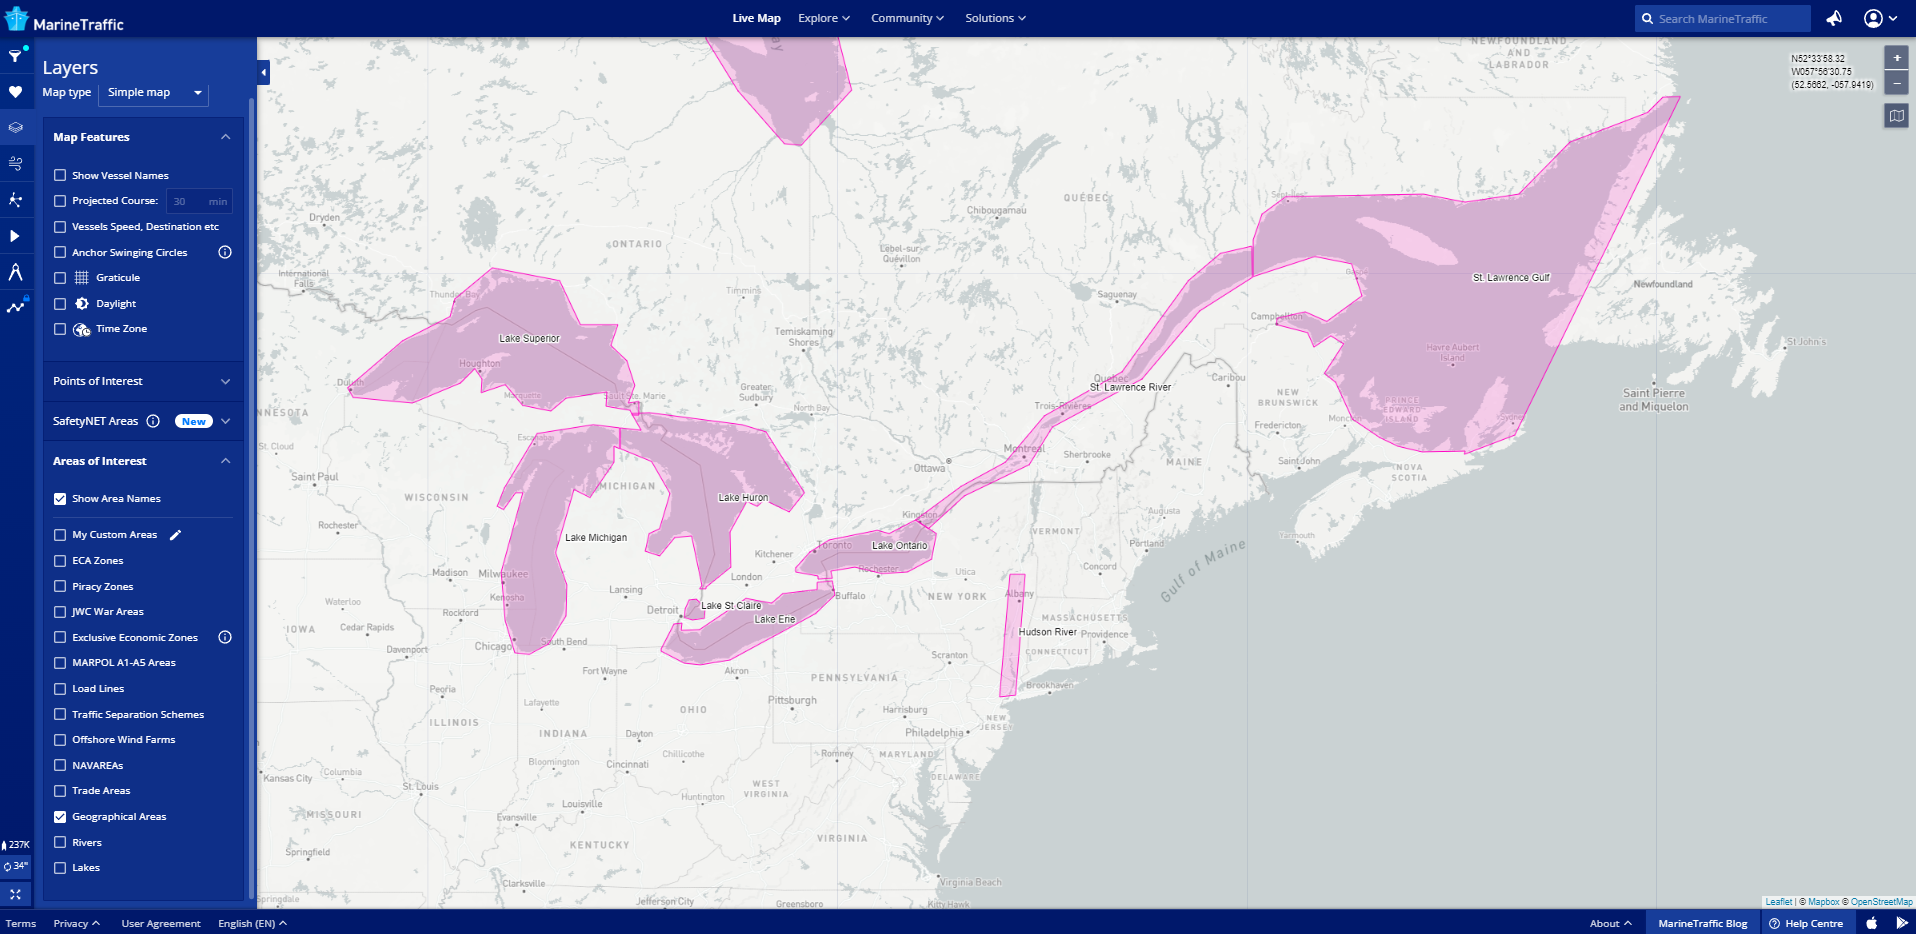 North America busiest route MarineTraffic